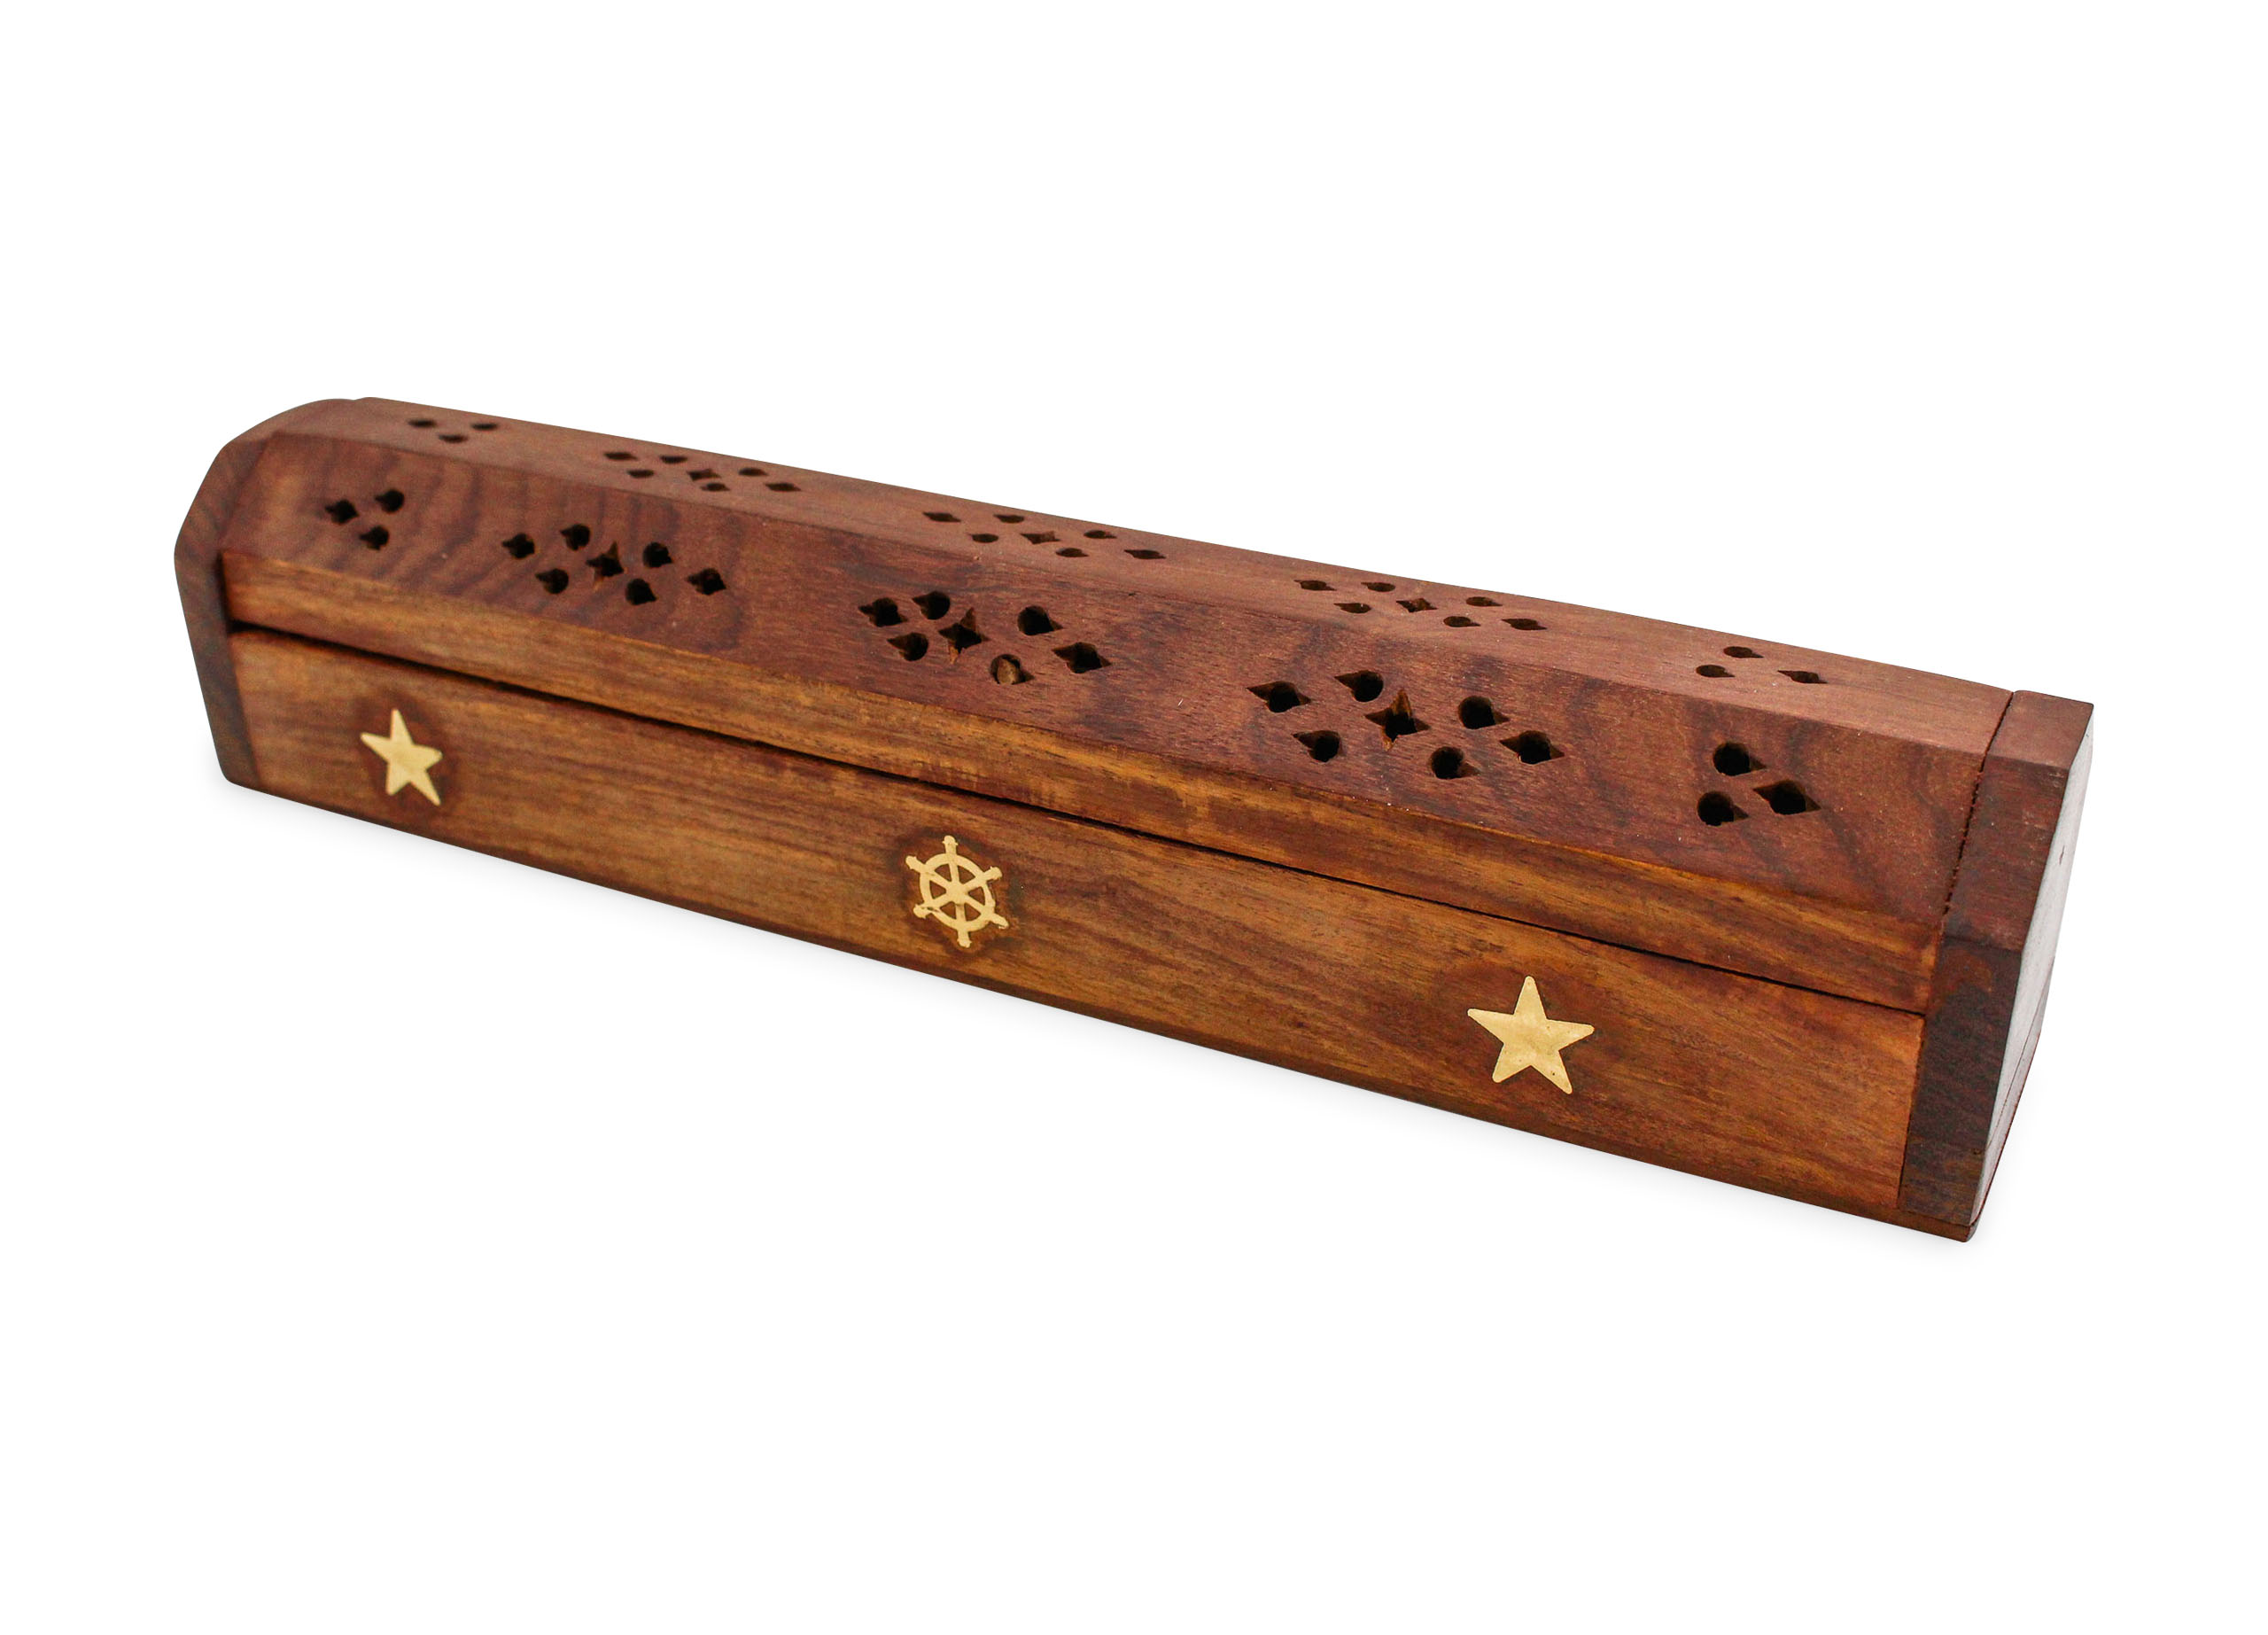 Star Wood Incense Chest Holder - Crystal Dreams